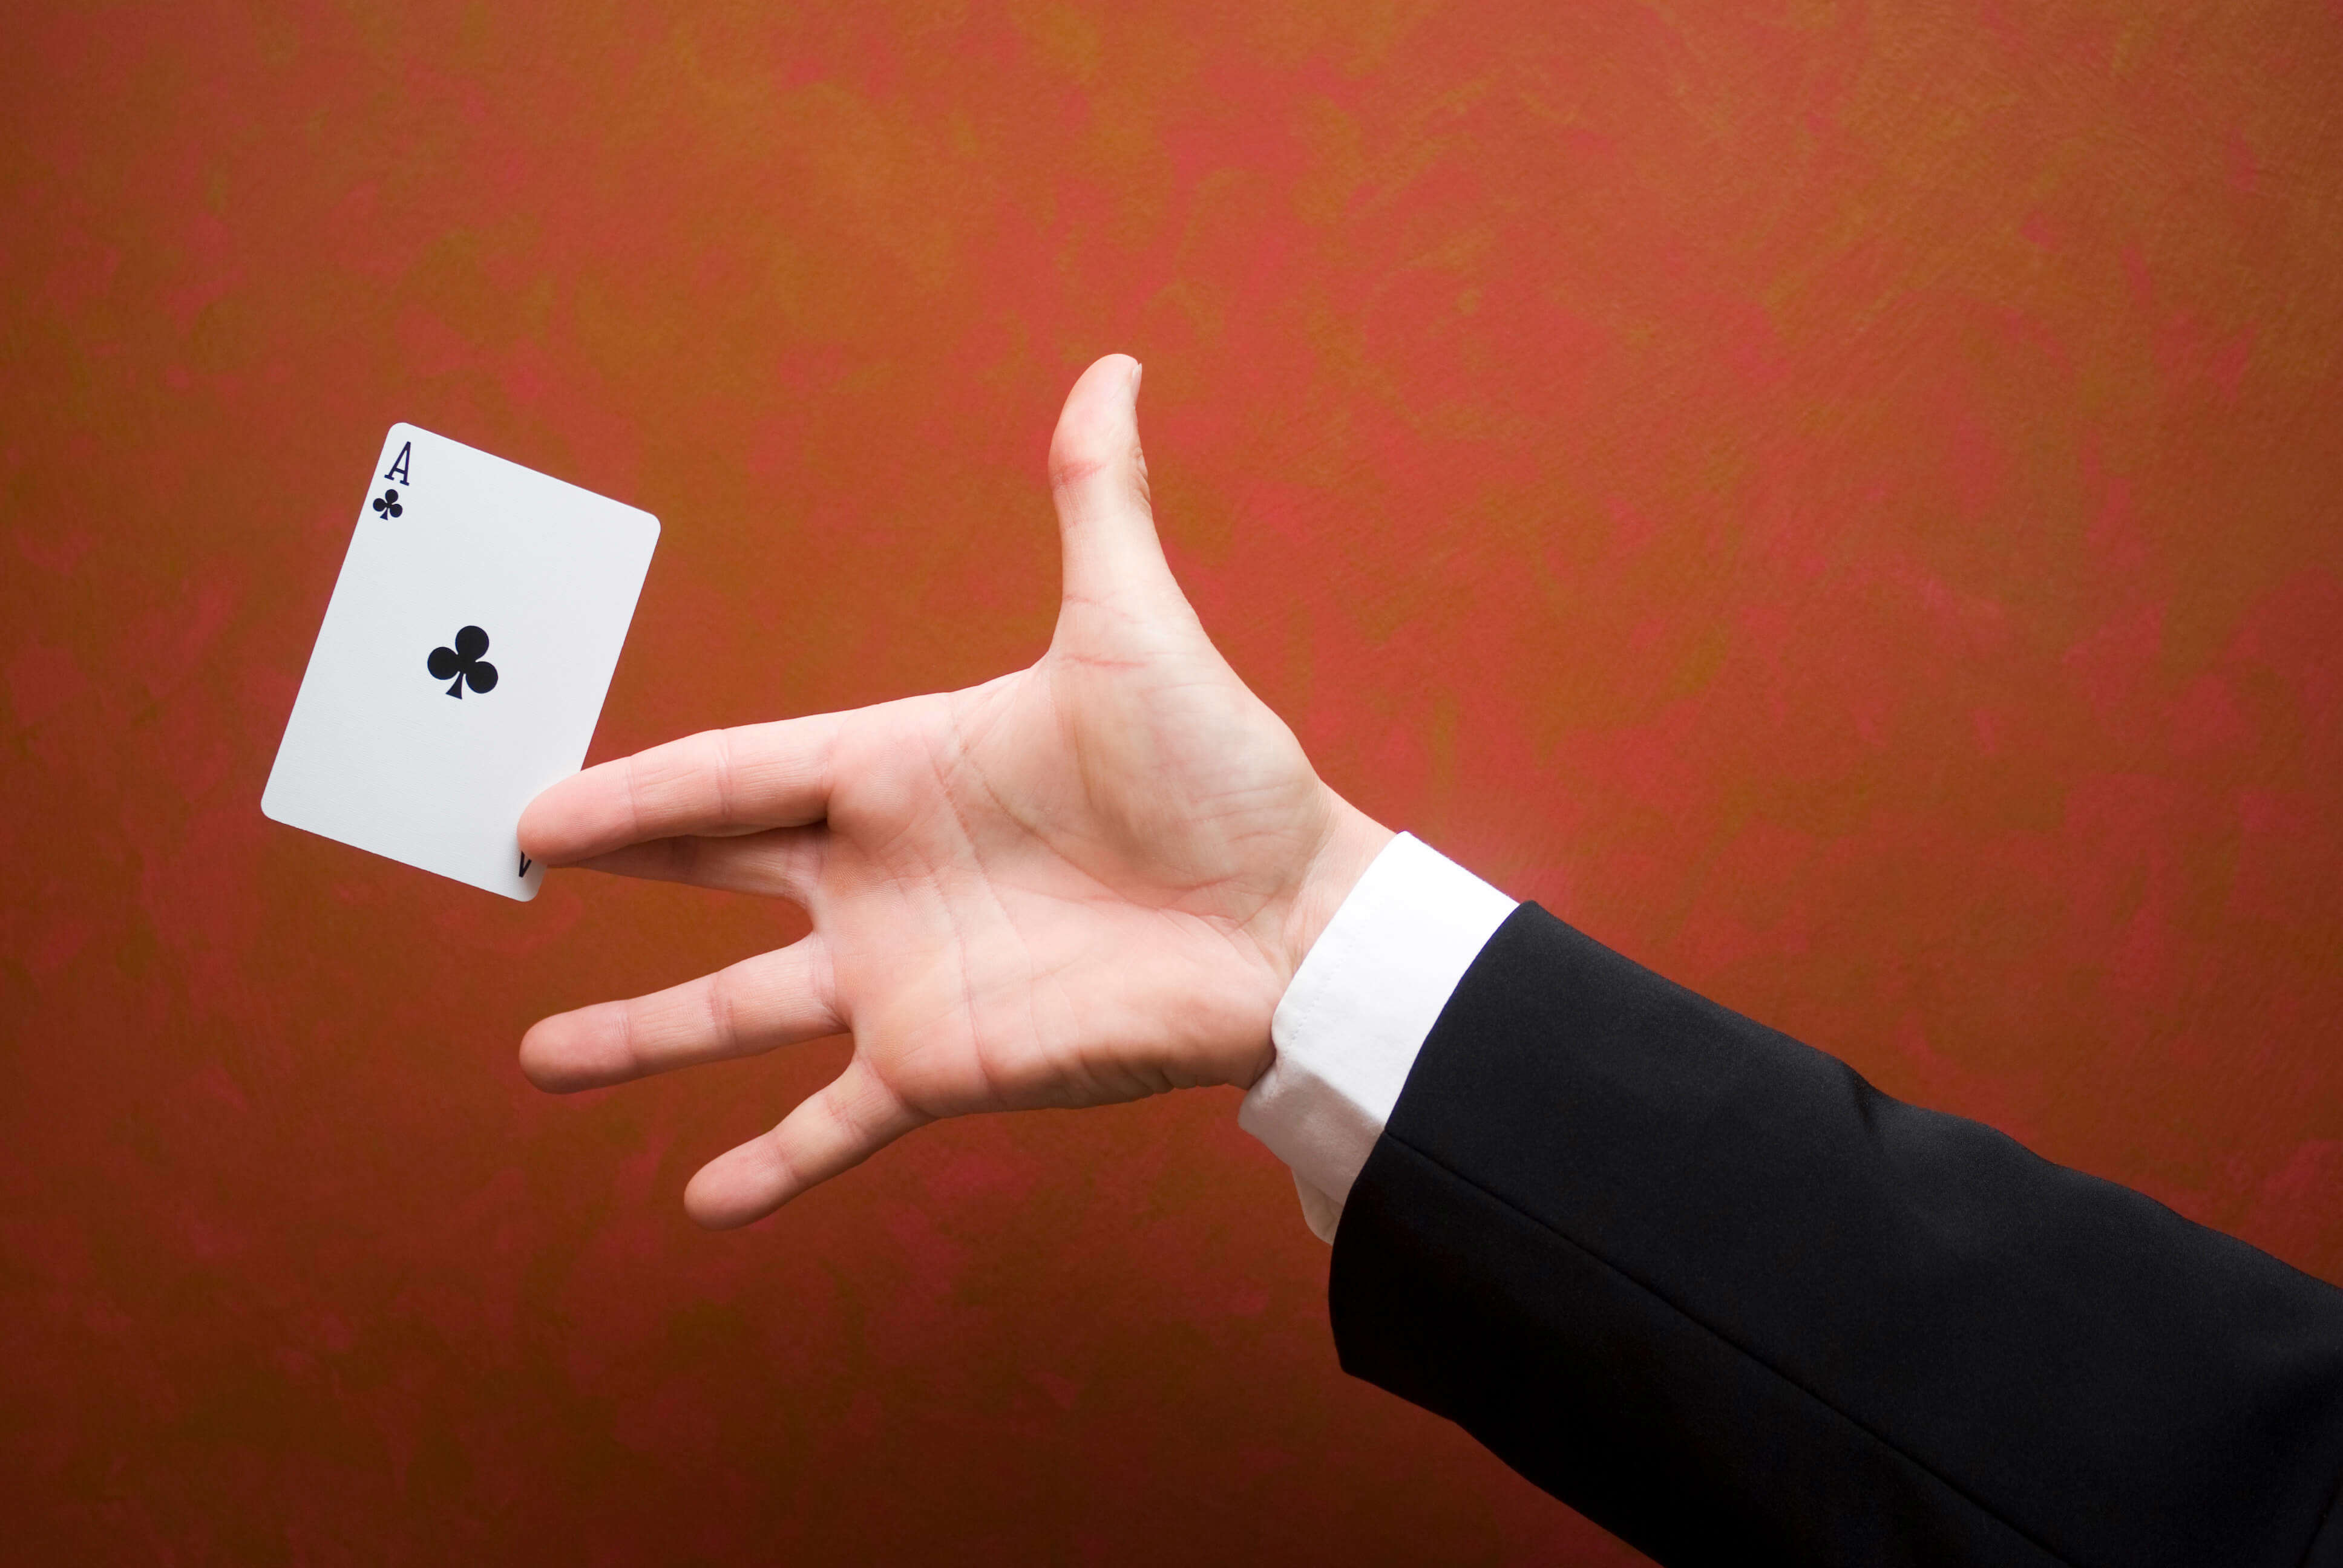 a magician's hand holding a playing card against a red background